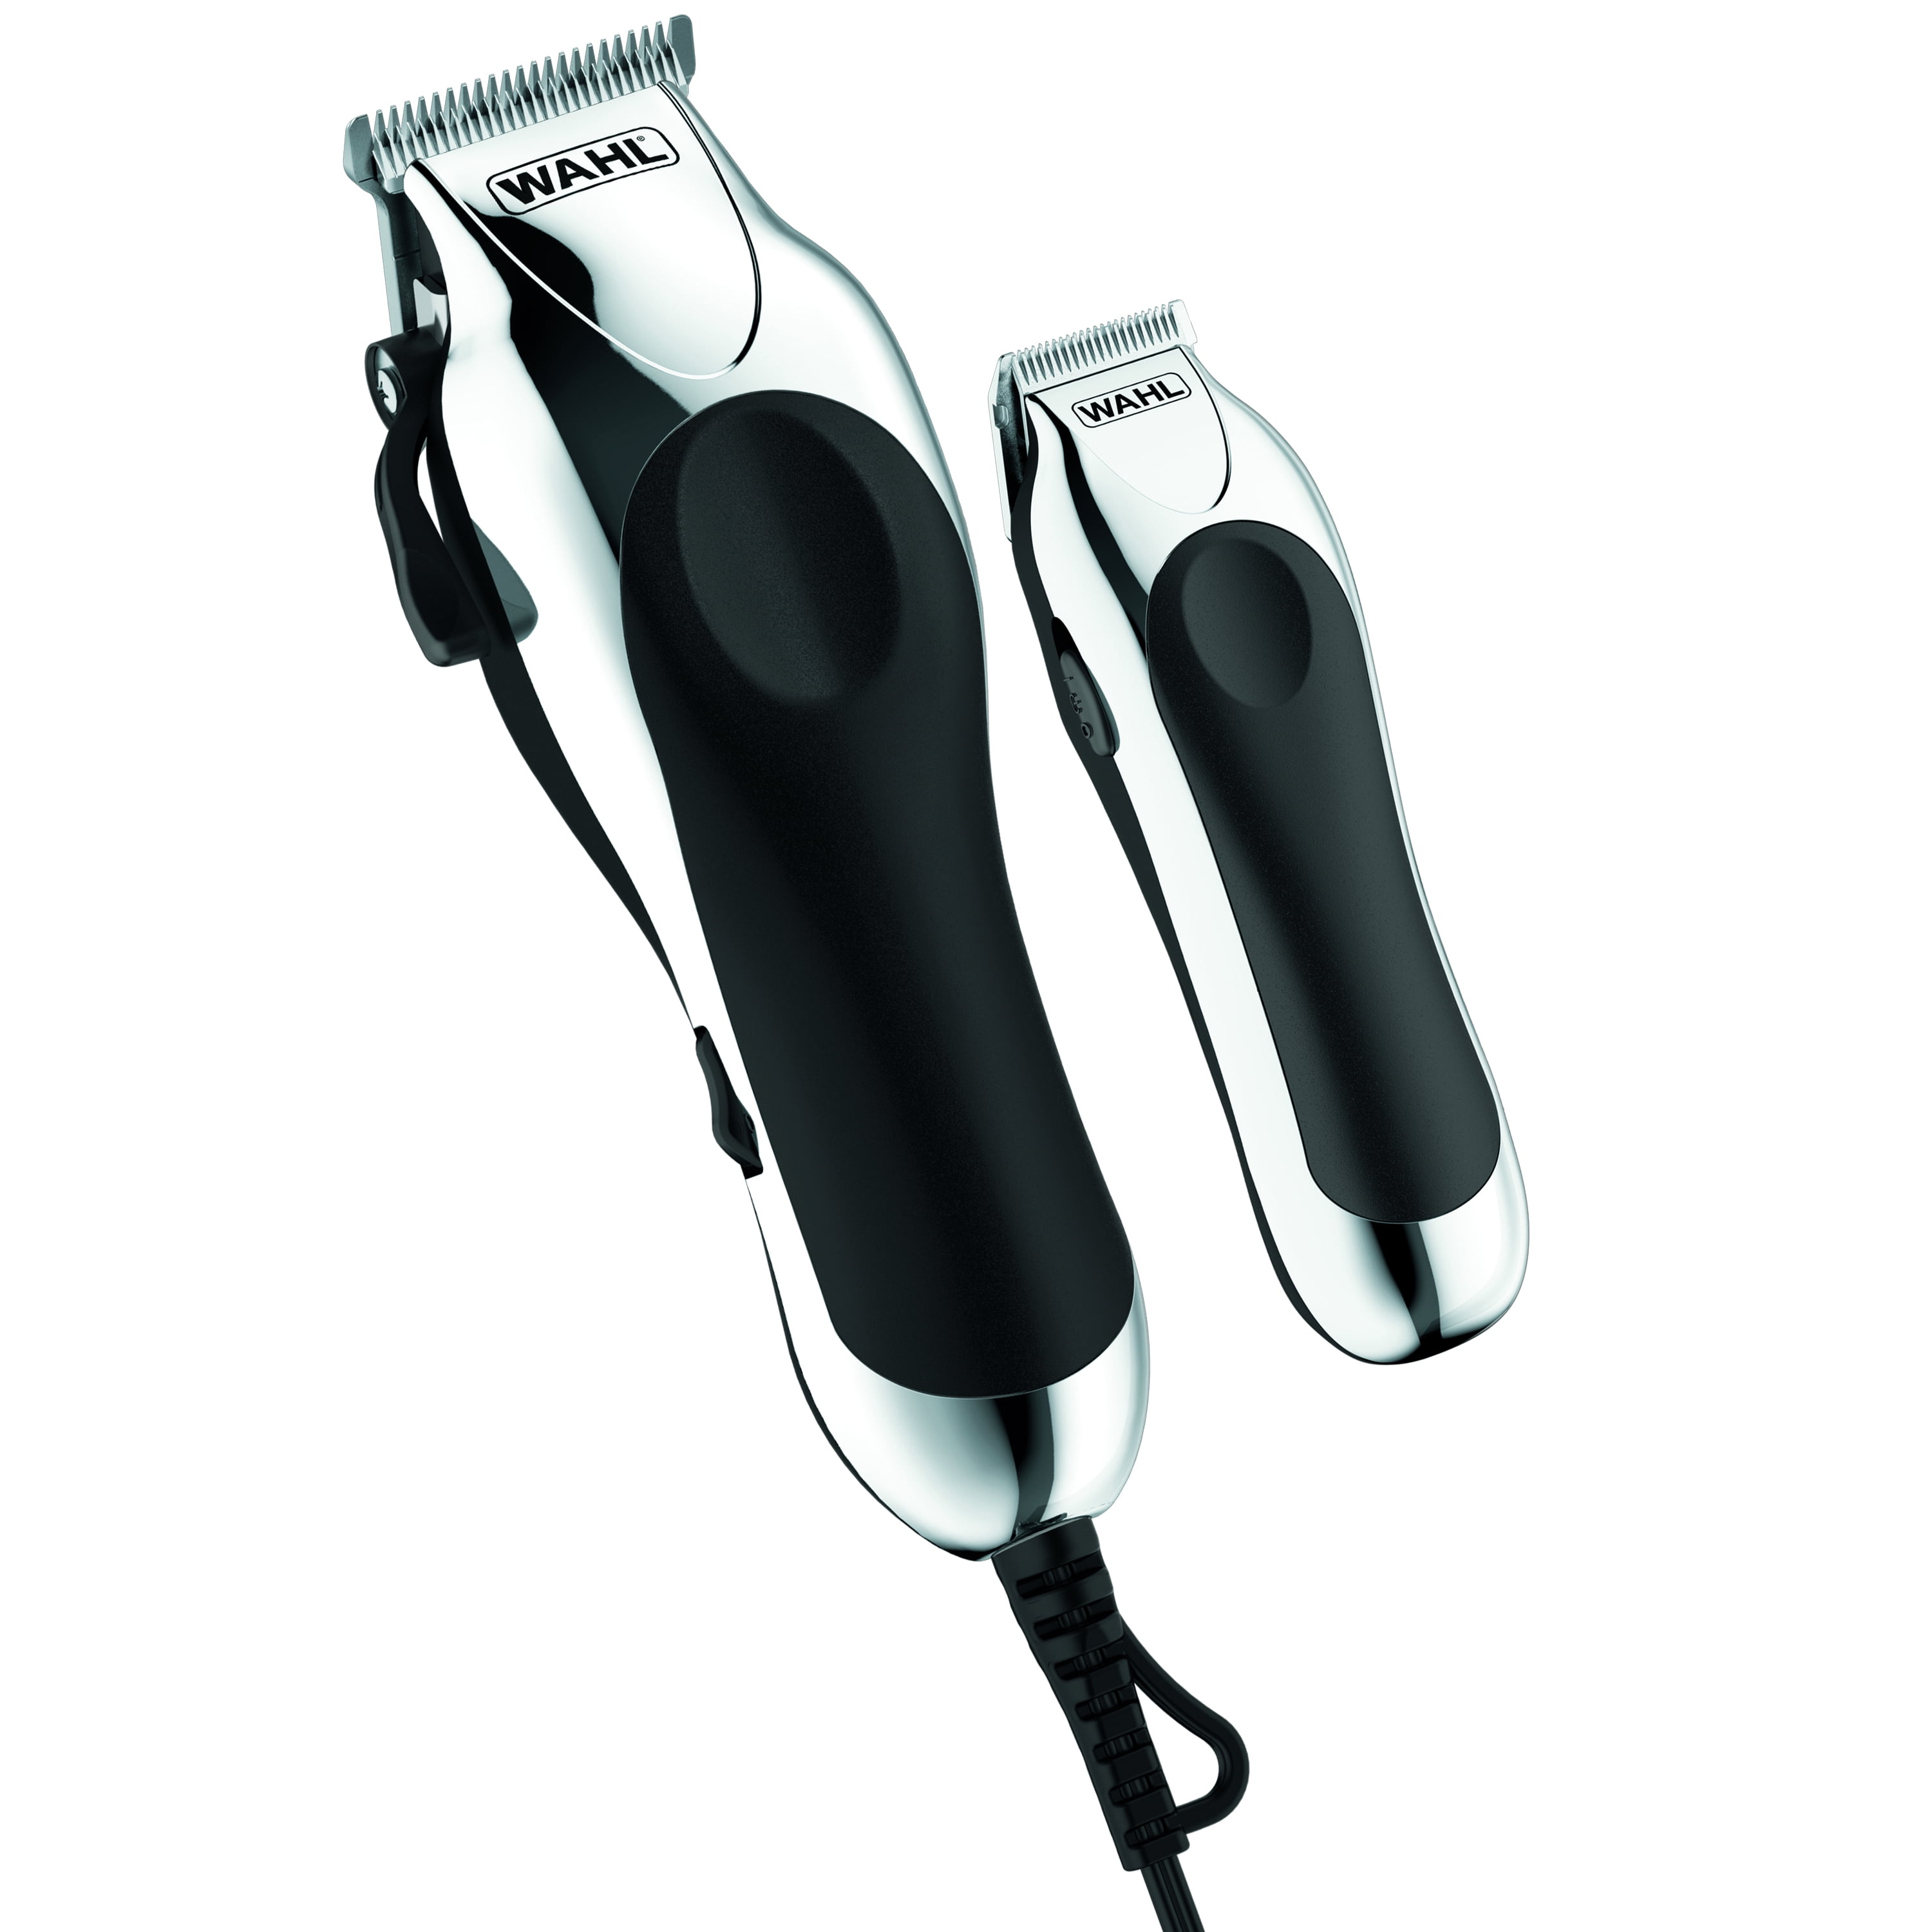 wahl hair clippers chrome pro